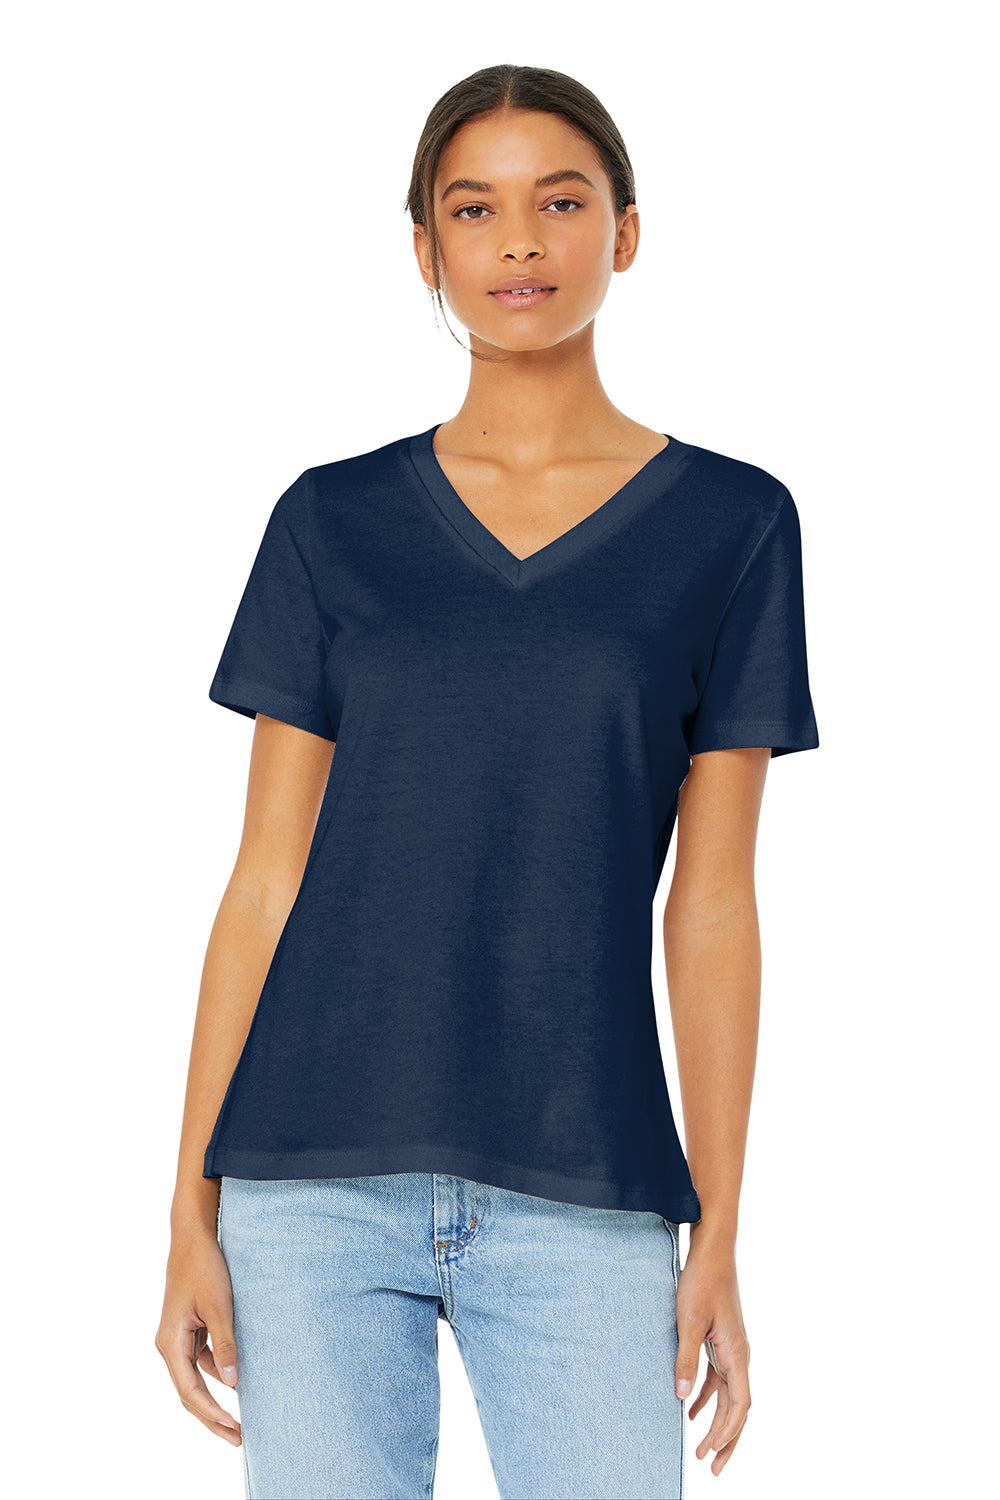 Bella + Canvas BC6405/6405 Womens Relaxed Jersey Short Sleeve V-Neck T-Shirt Navy Blue Model Front